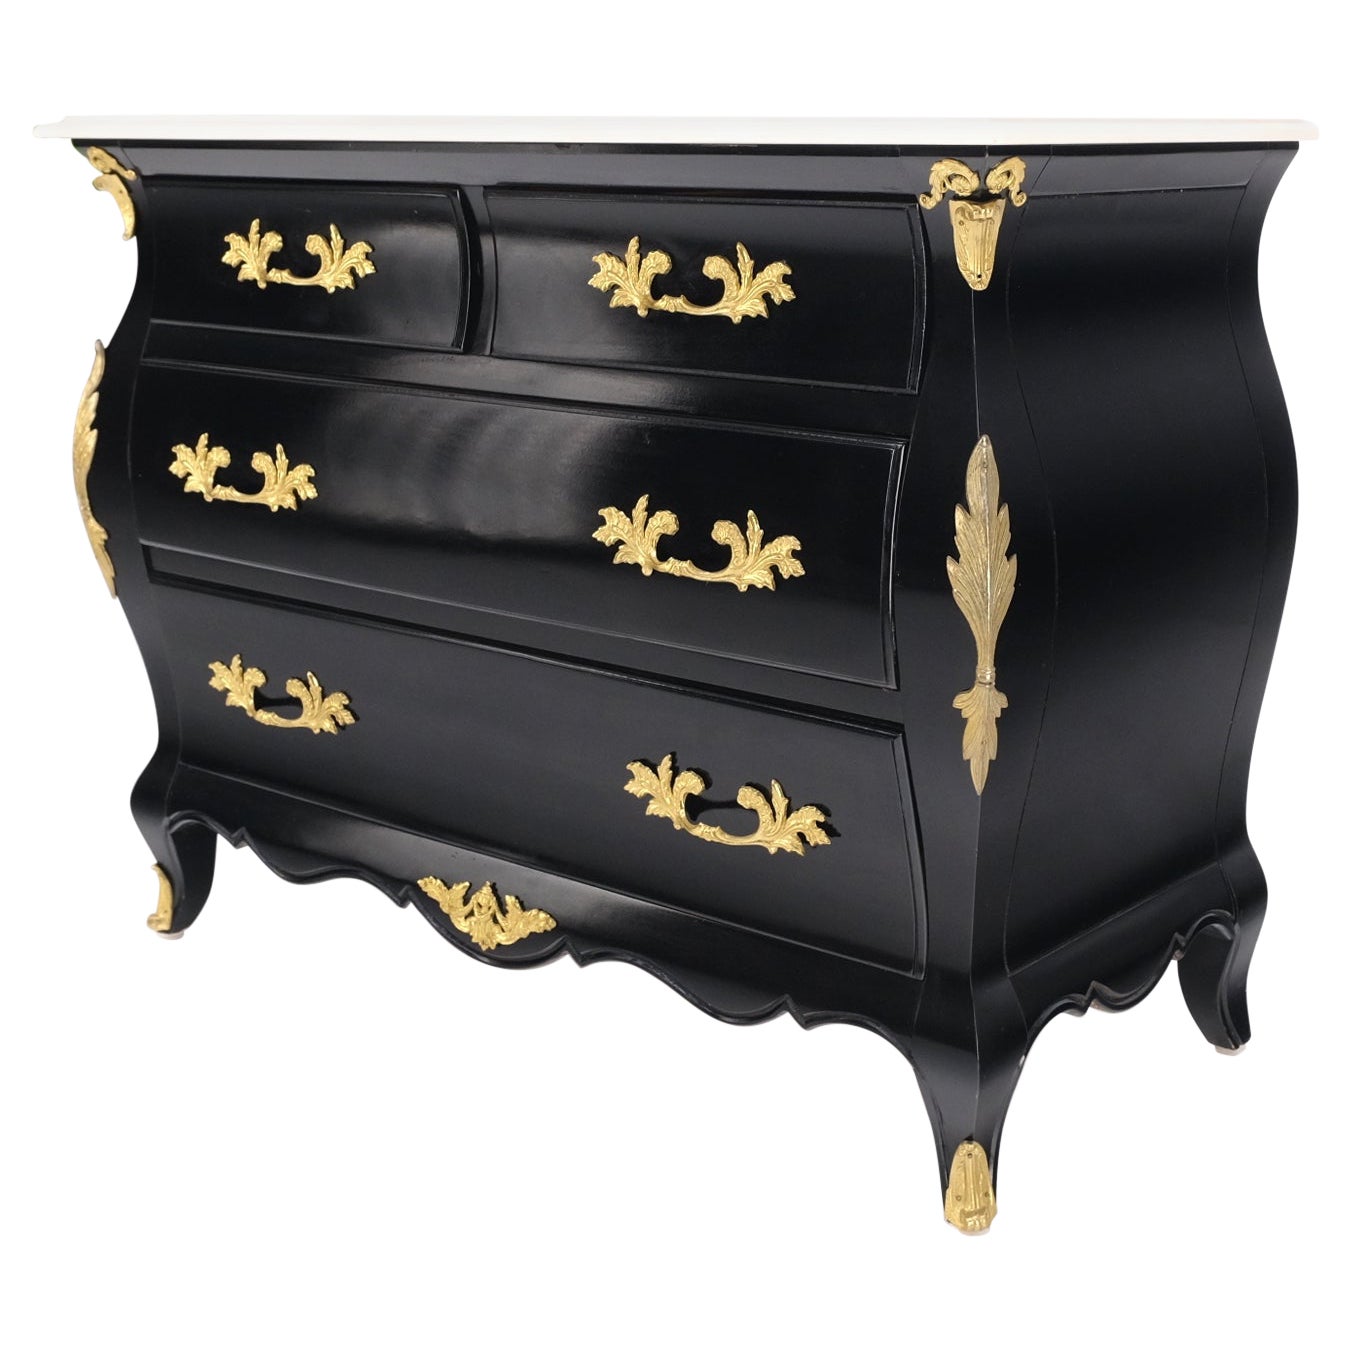 Marble Top Black Lacquer Brass Mounts 4 Drawer Bombay Dresser Chest Drawers Mint For Sale